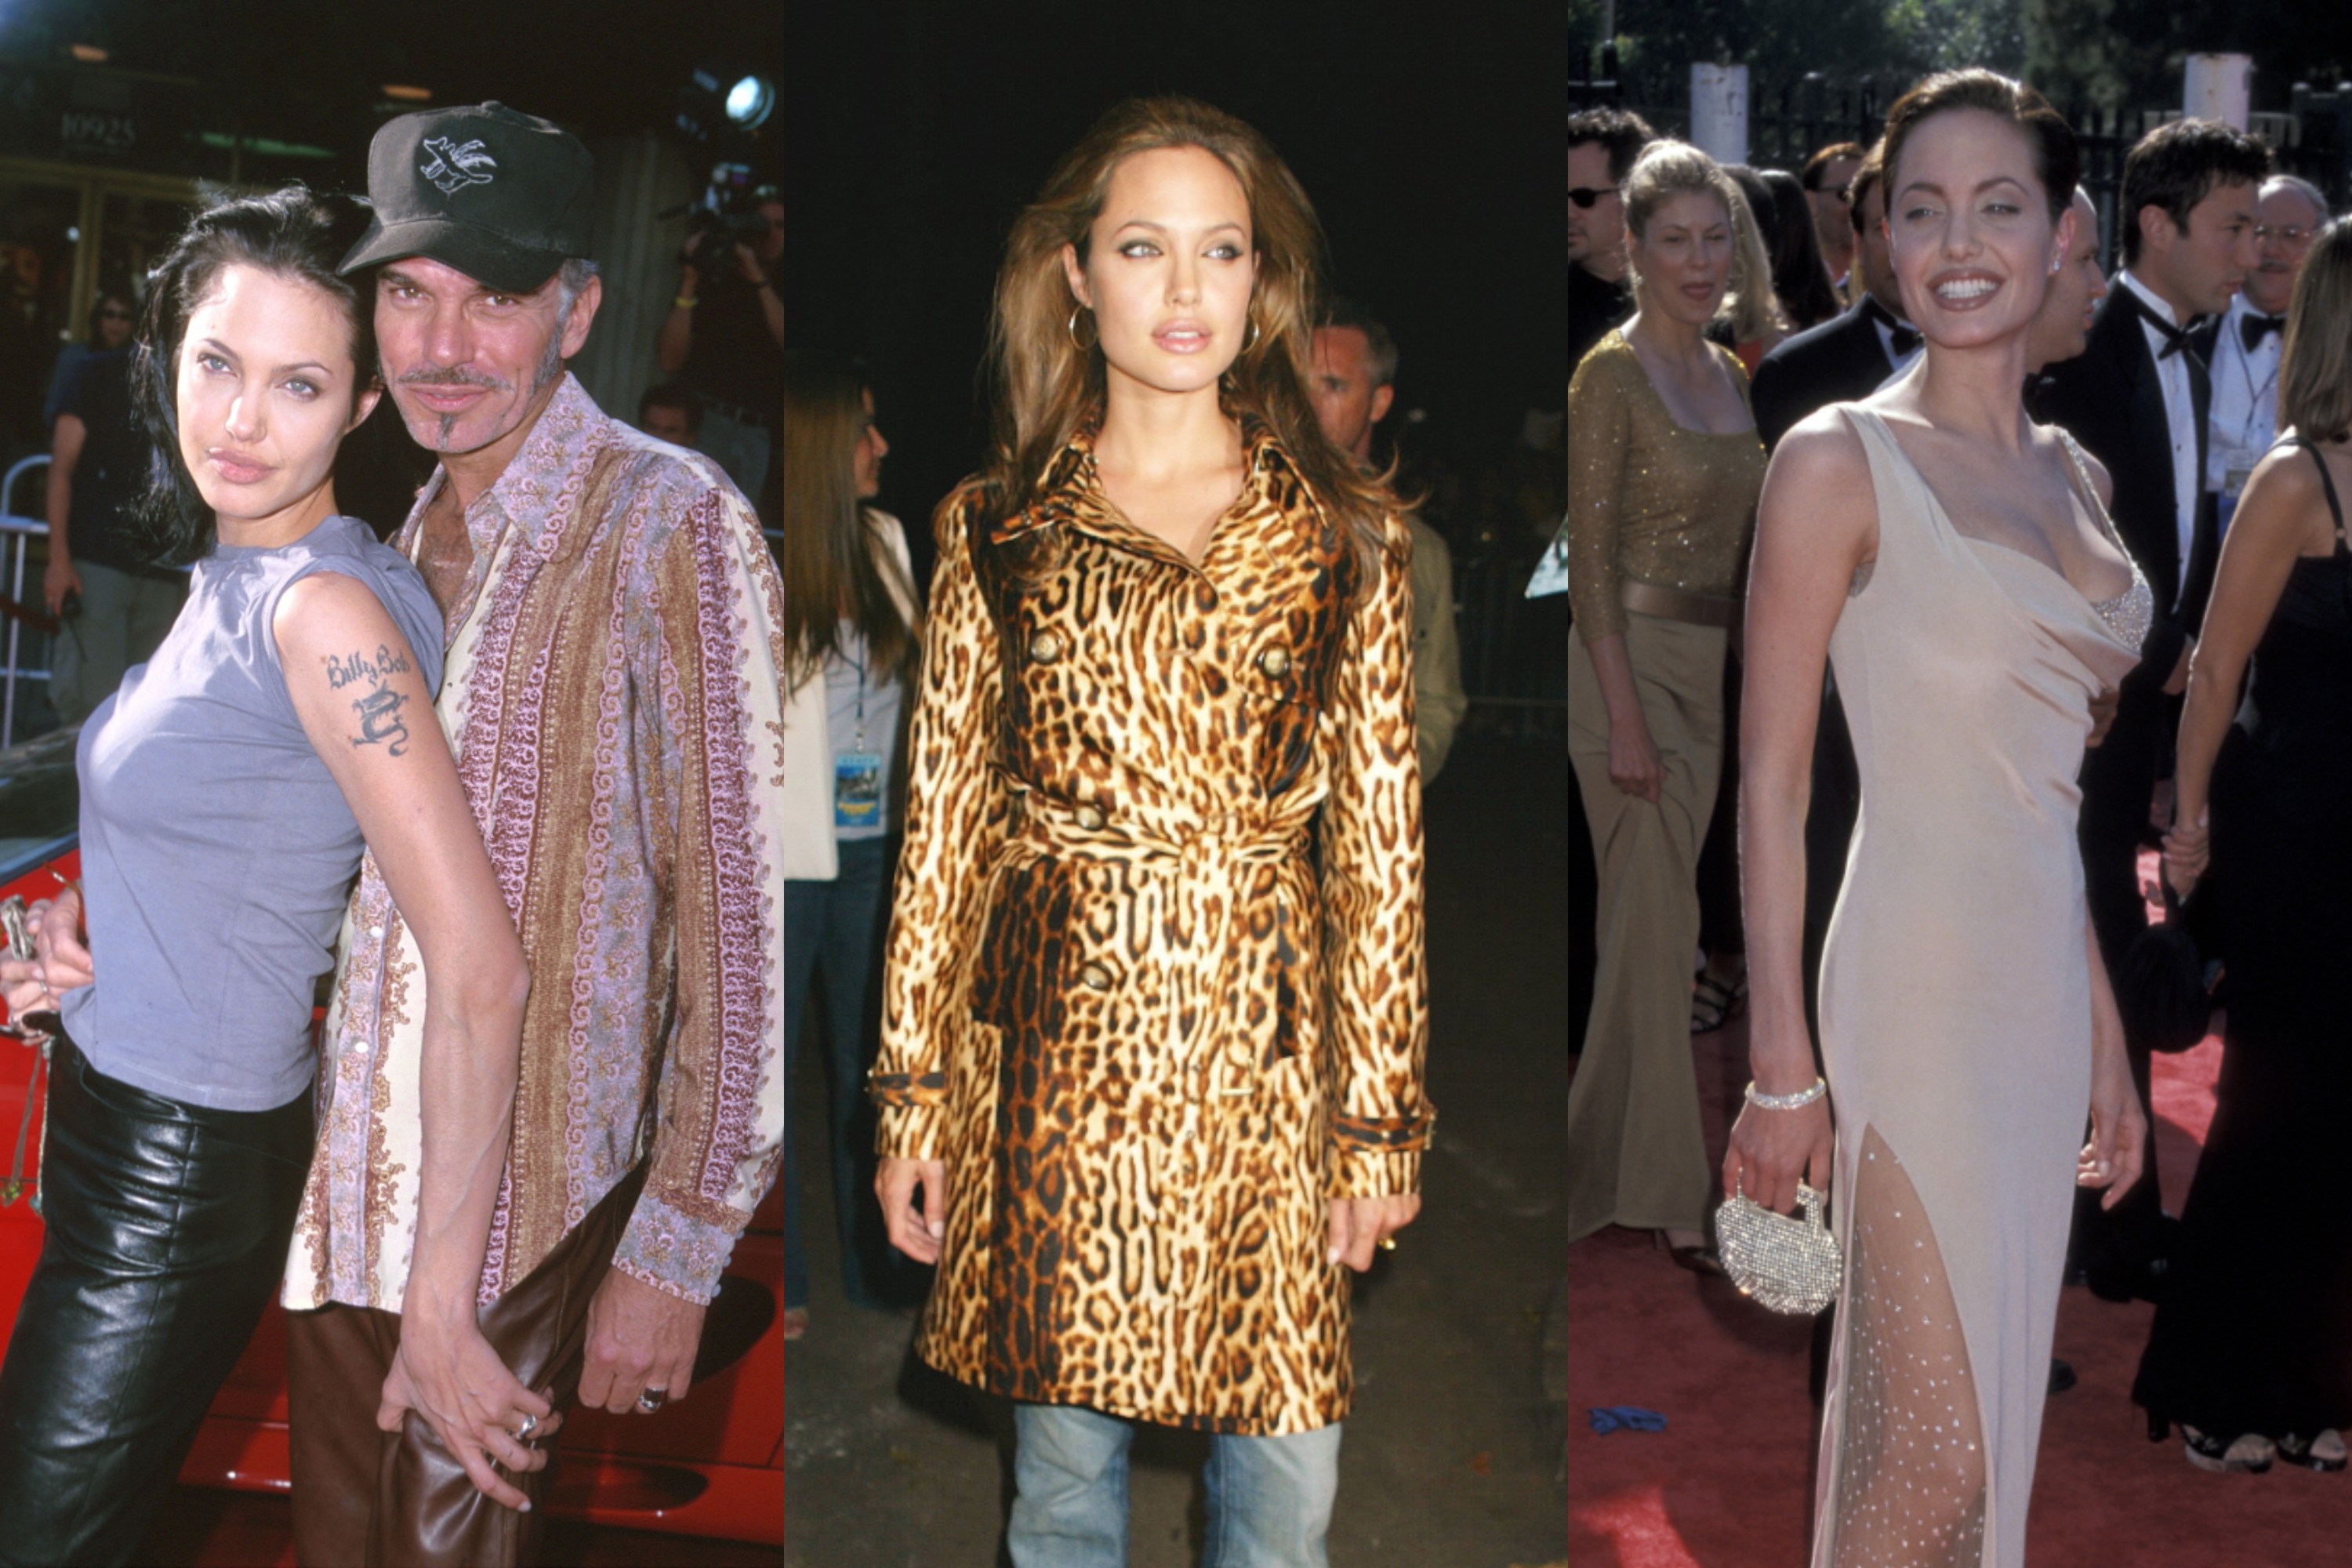 90s fashion: Angelina Jolie's red carpet style and iconic outfits